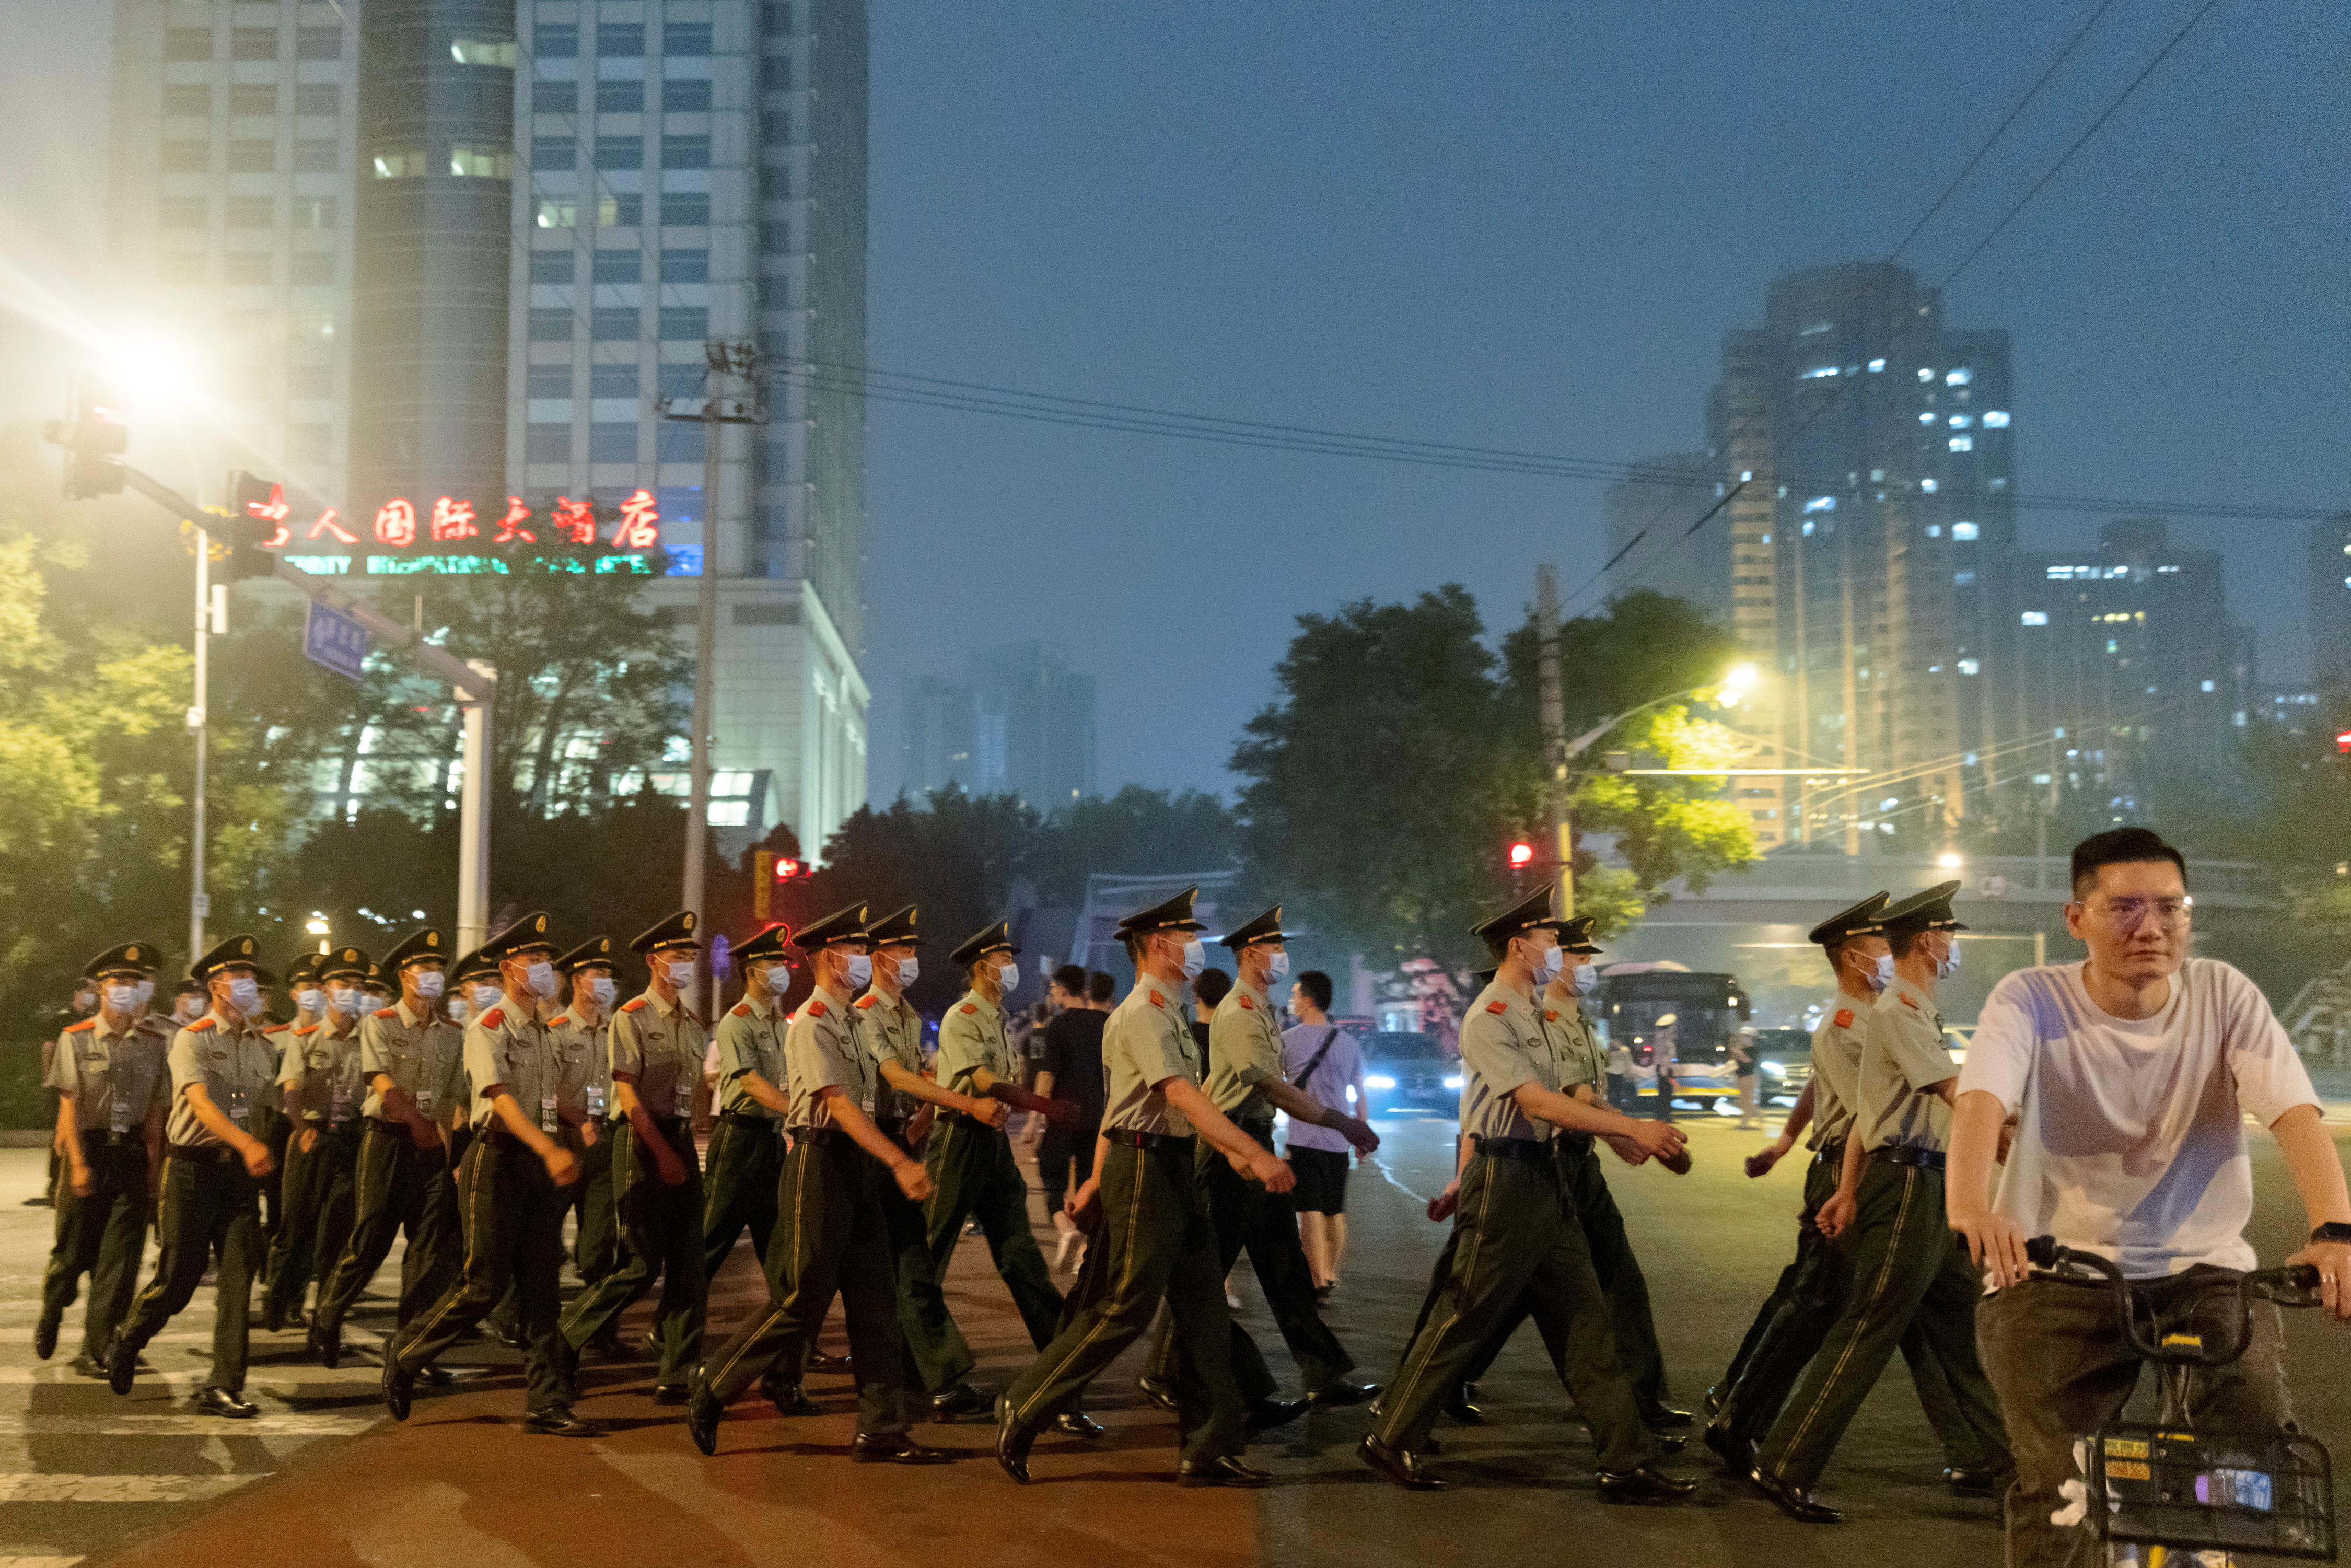 Officers of the People's Armed Police move into position as crowd control before a rehearsal of a fireworks display near the National Stadium ahead of the 100th founding anniversary of the Communist Party of China in Beijing